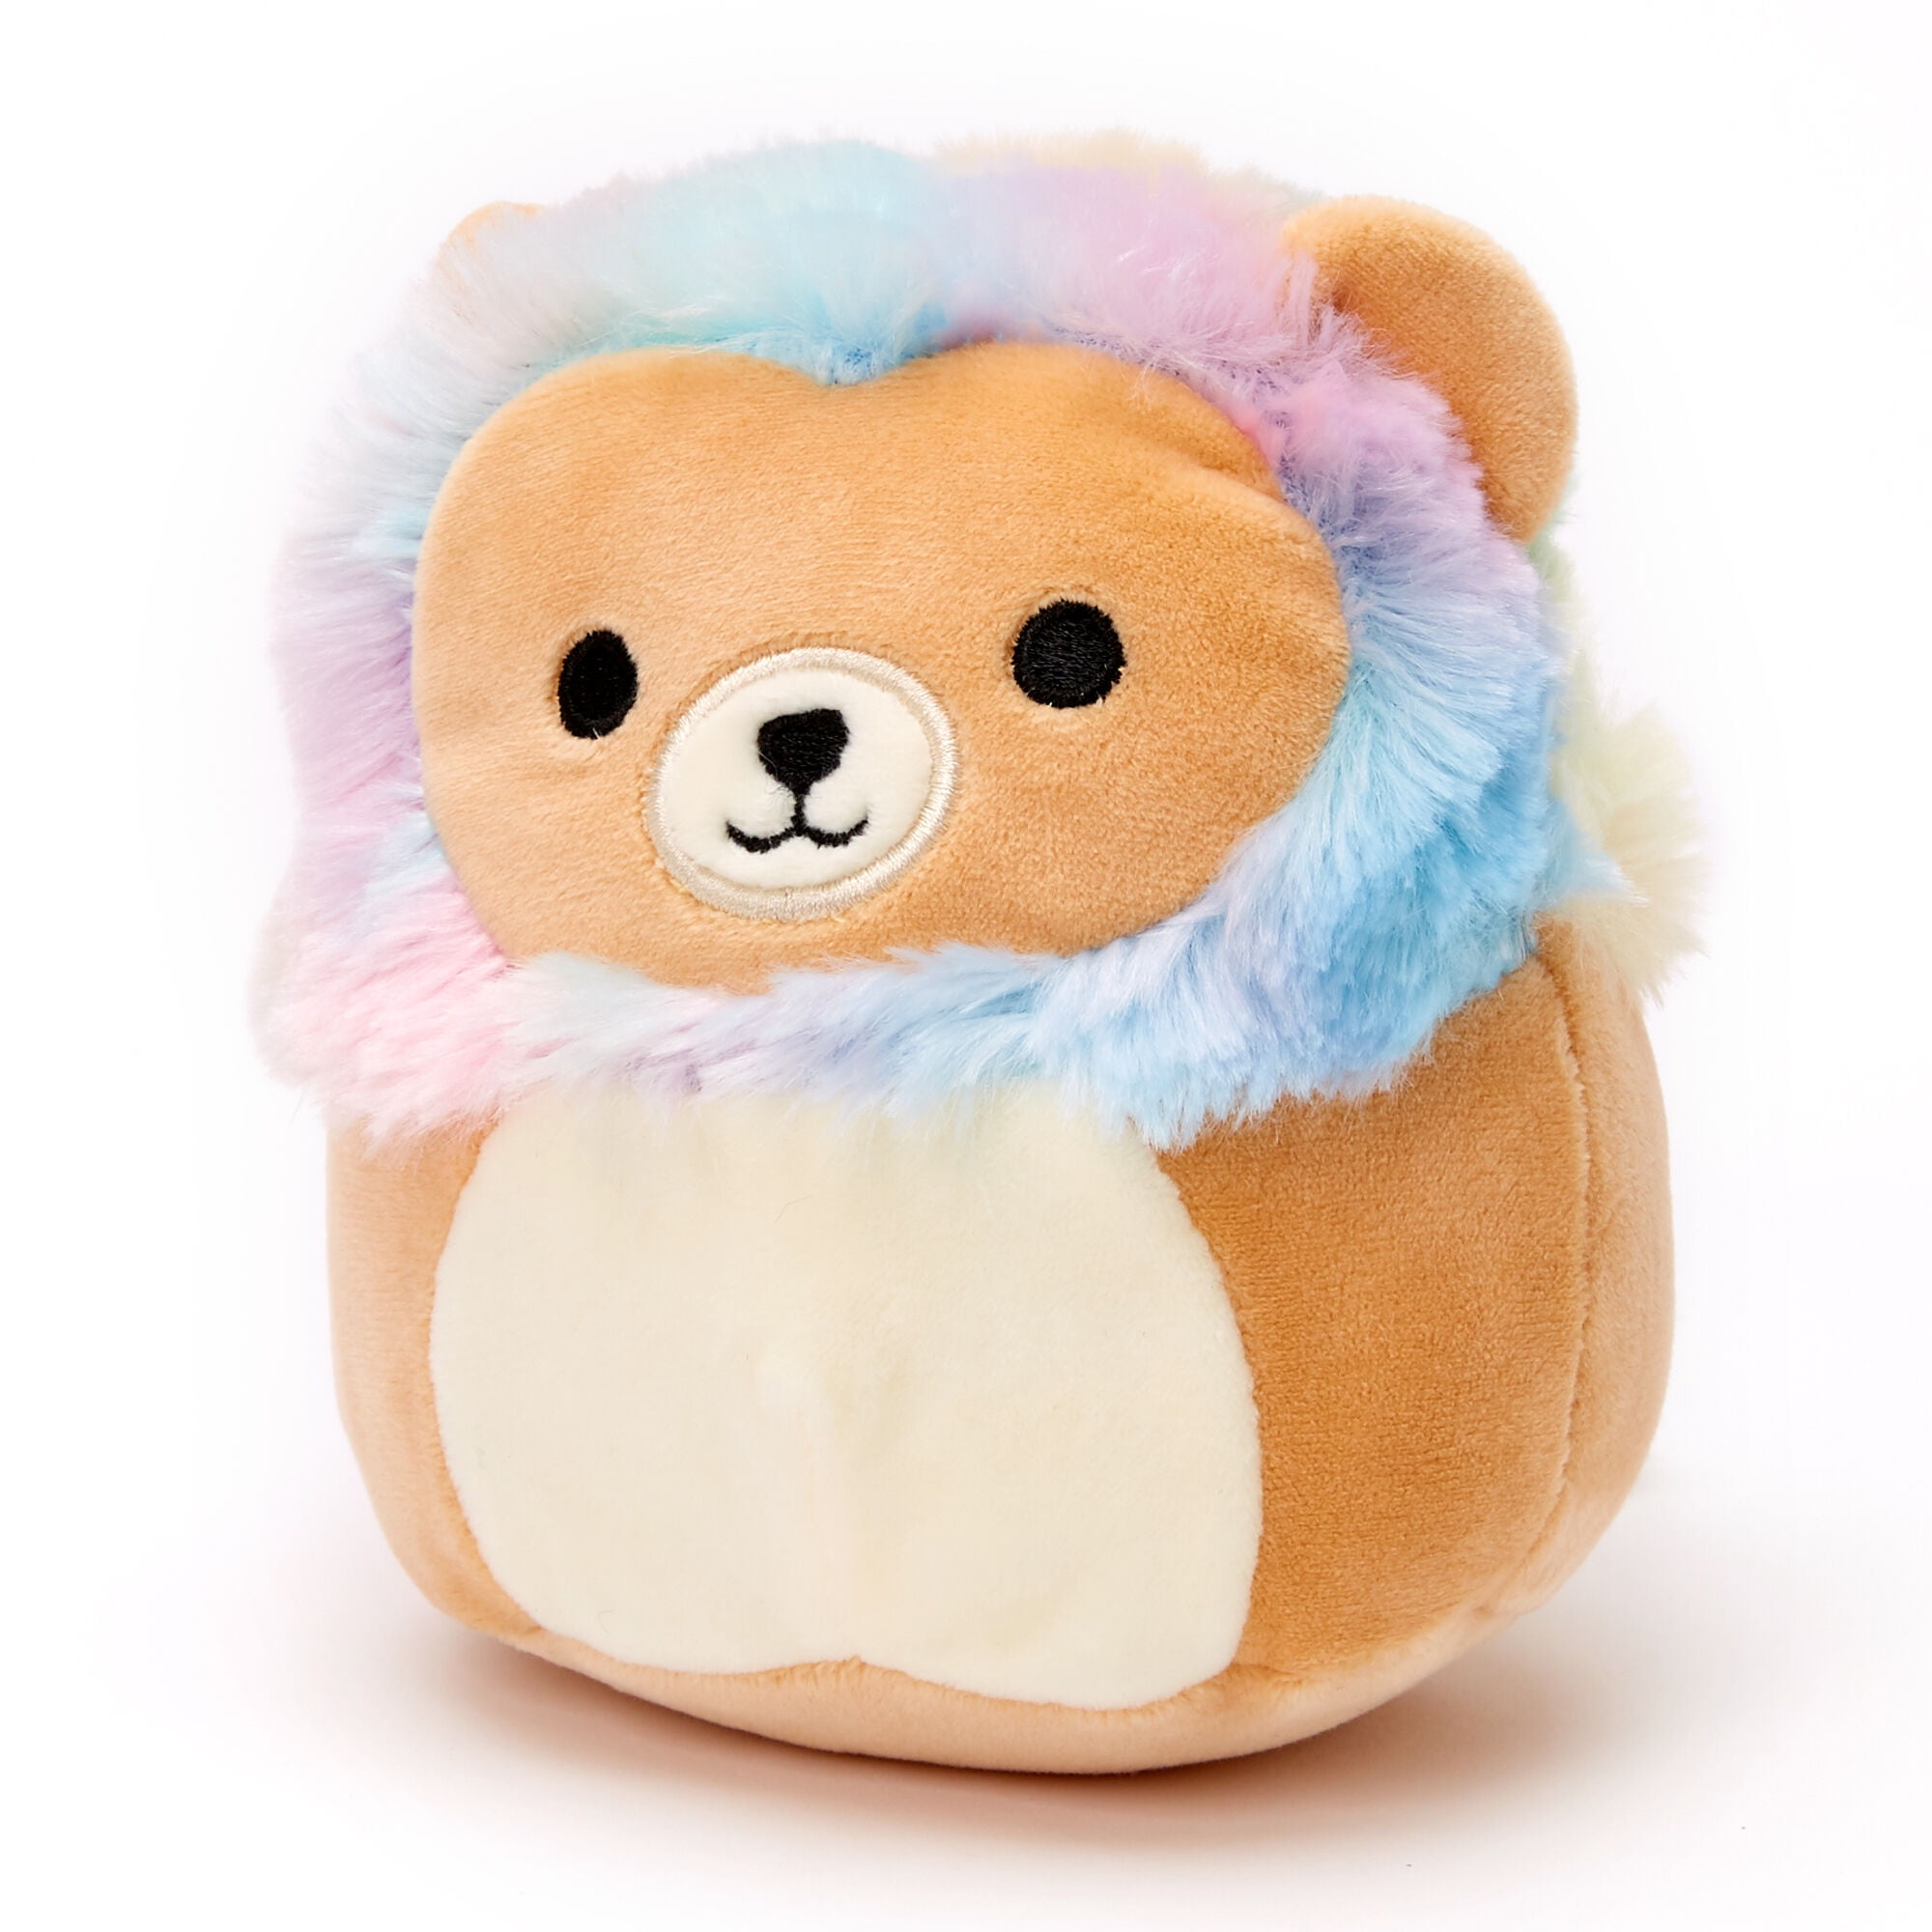 Details about   Squishmallow Kellytoy 8” Lion Super Soft Squishmallows Plush Stuffed Animal New 